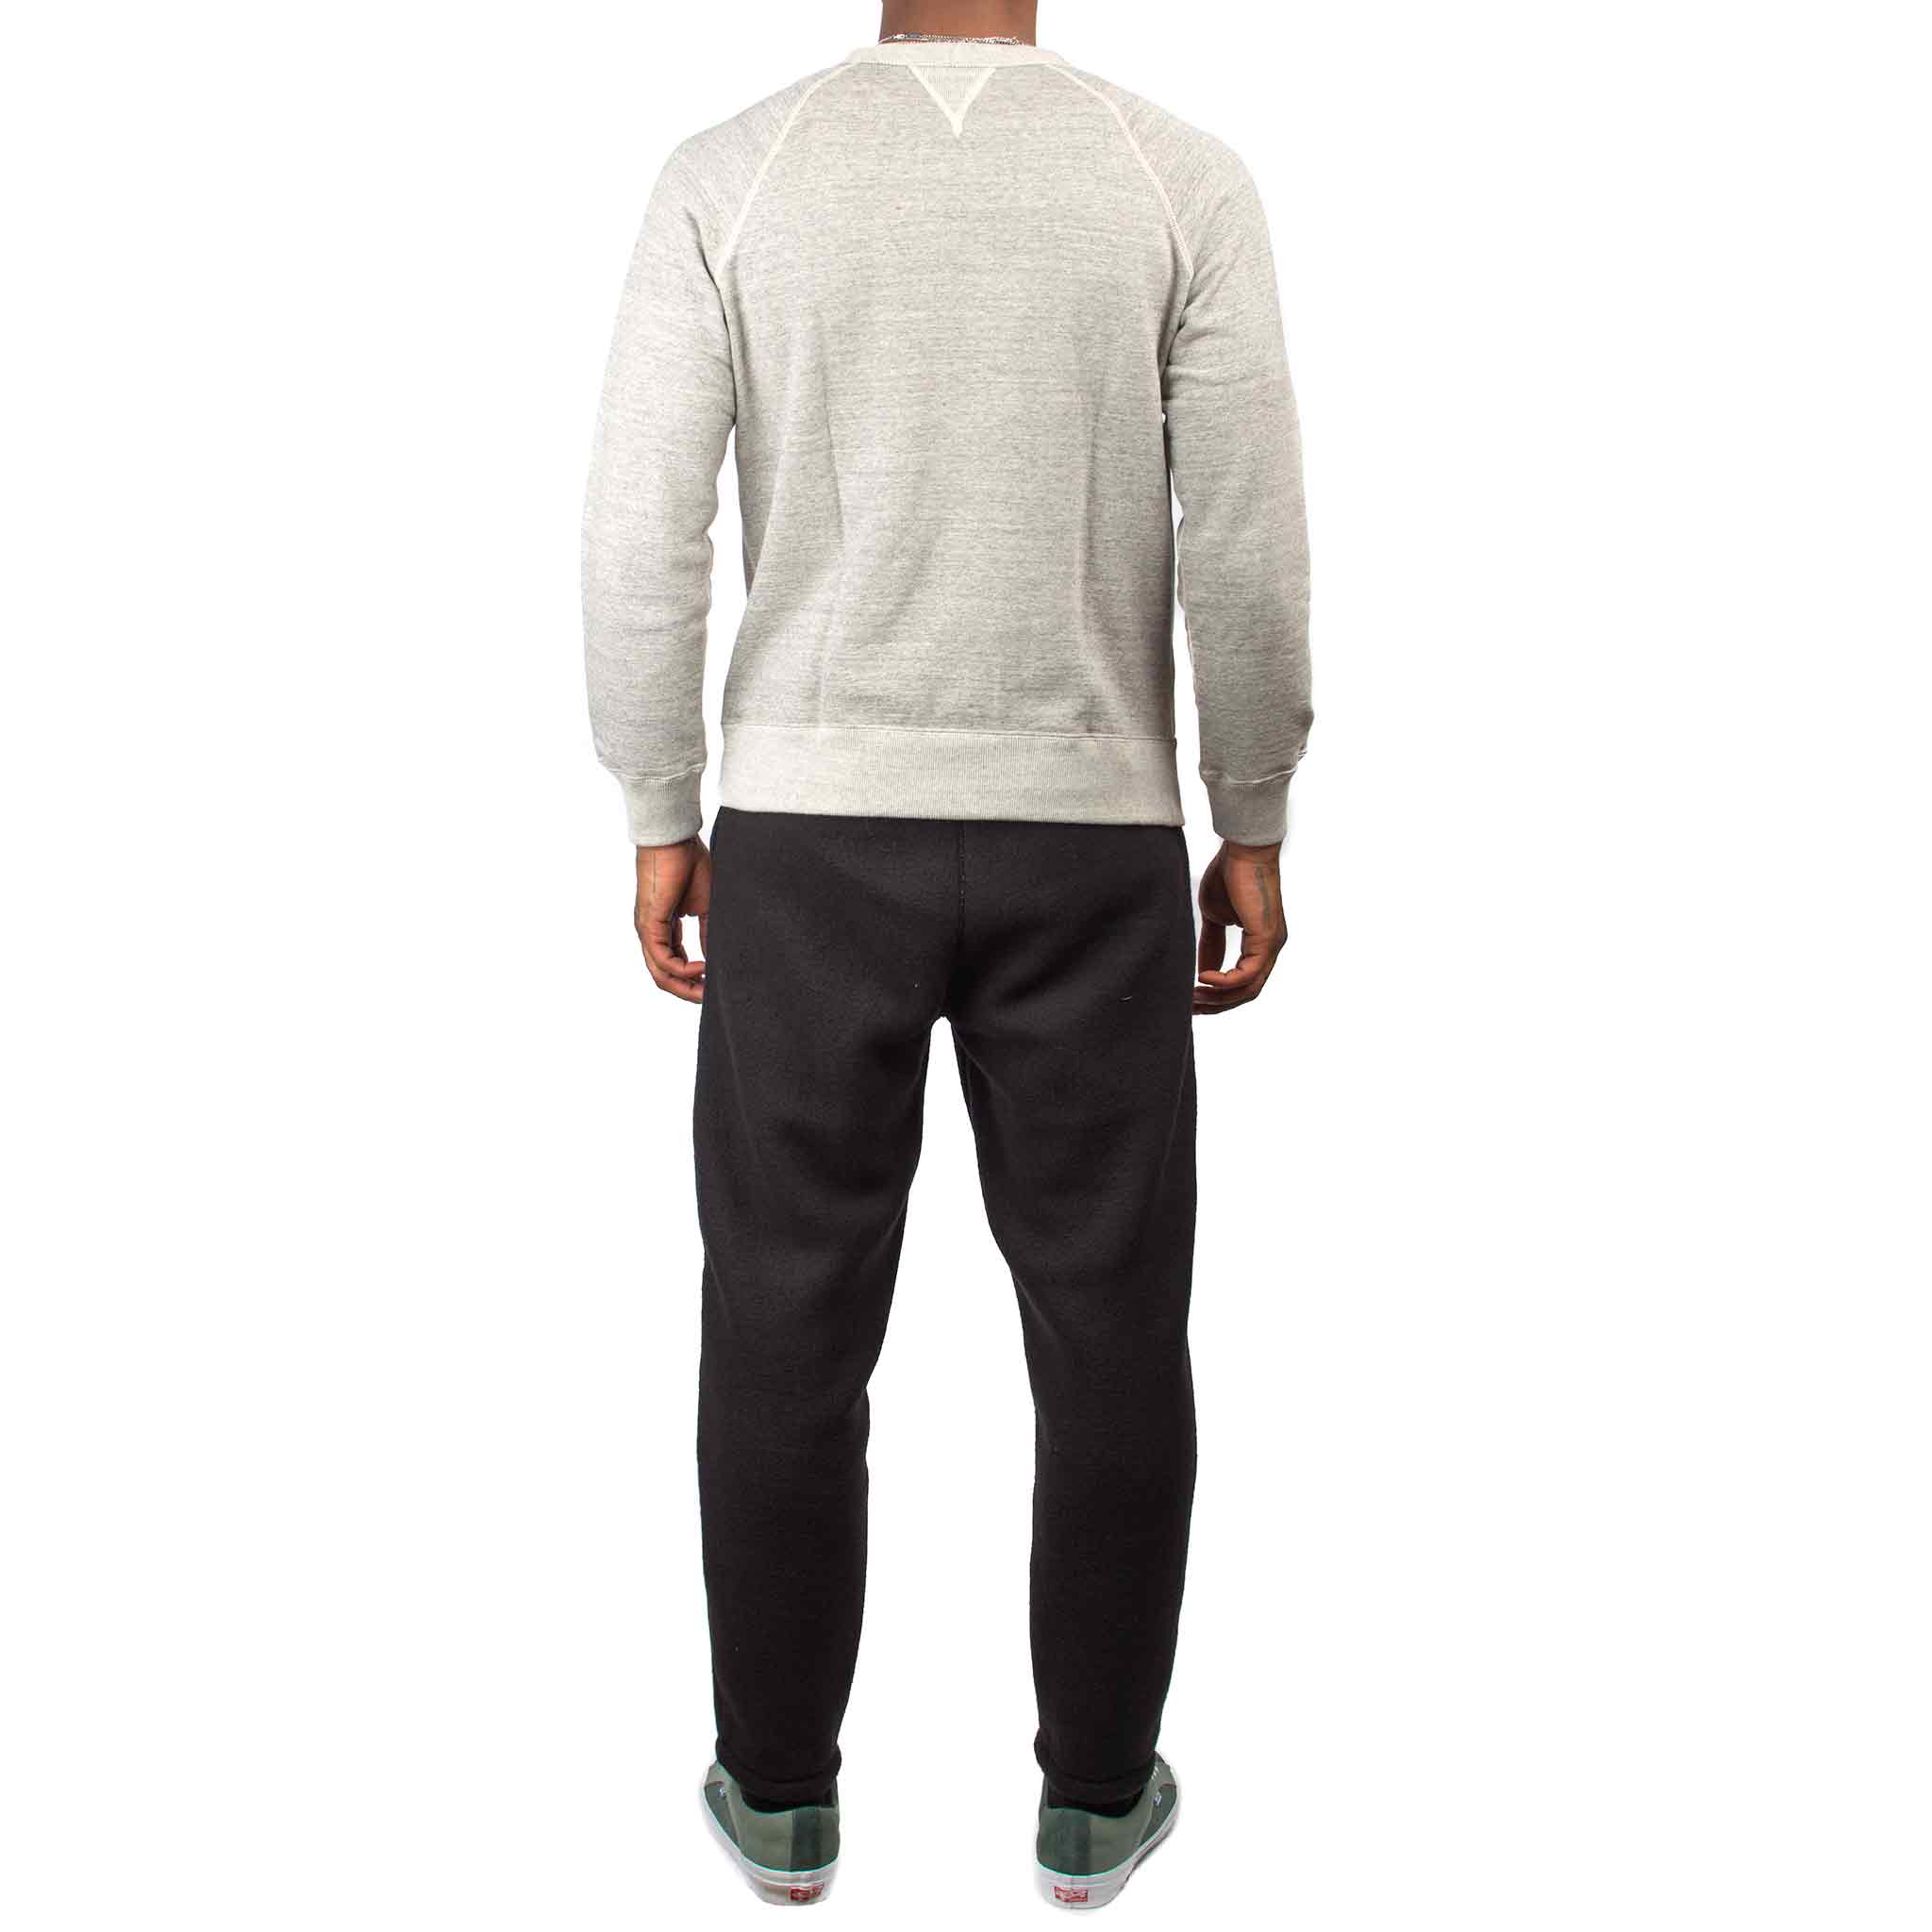 The Real McCoy's MC21102 Trousers, Cold Weather, Fleece Black Back